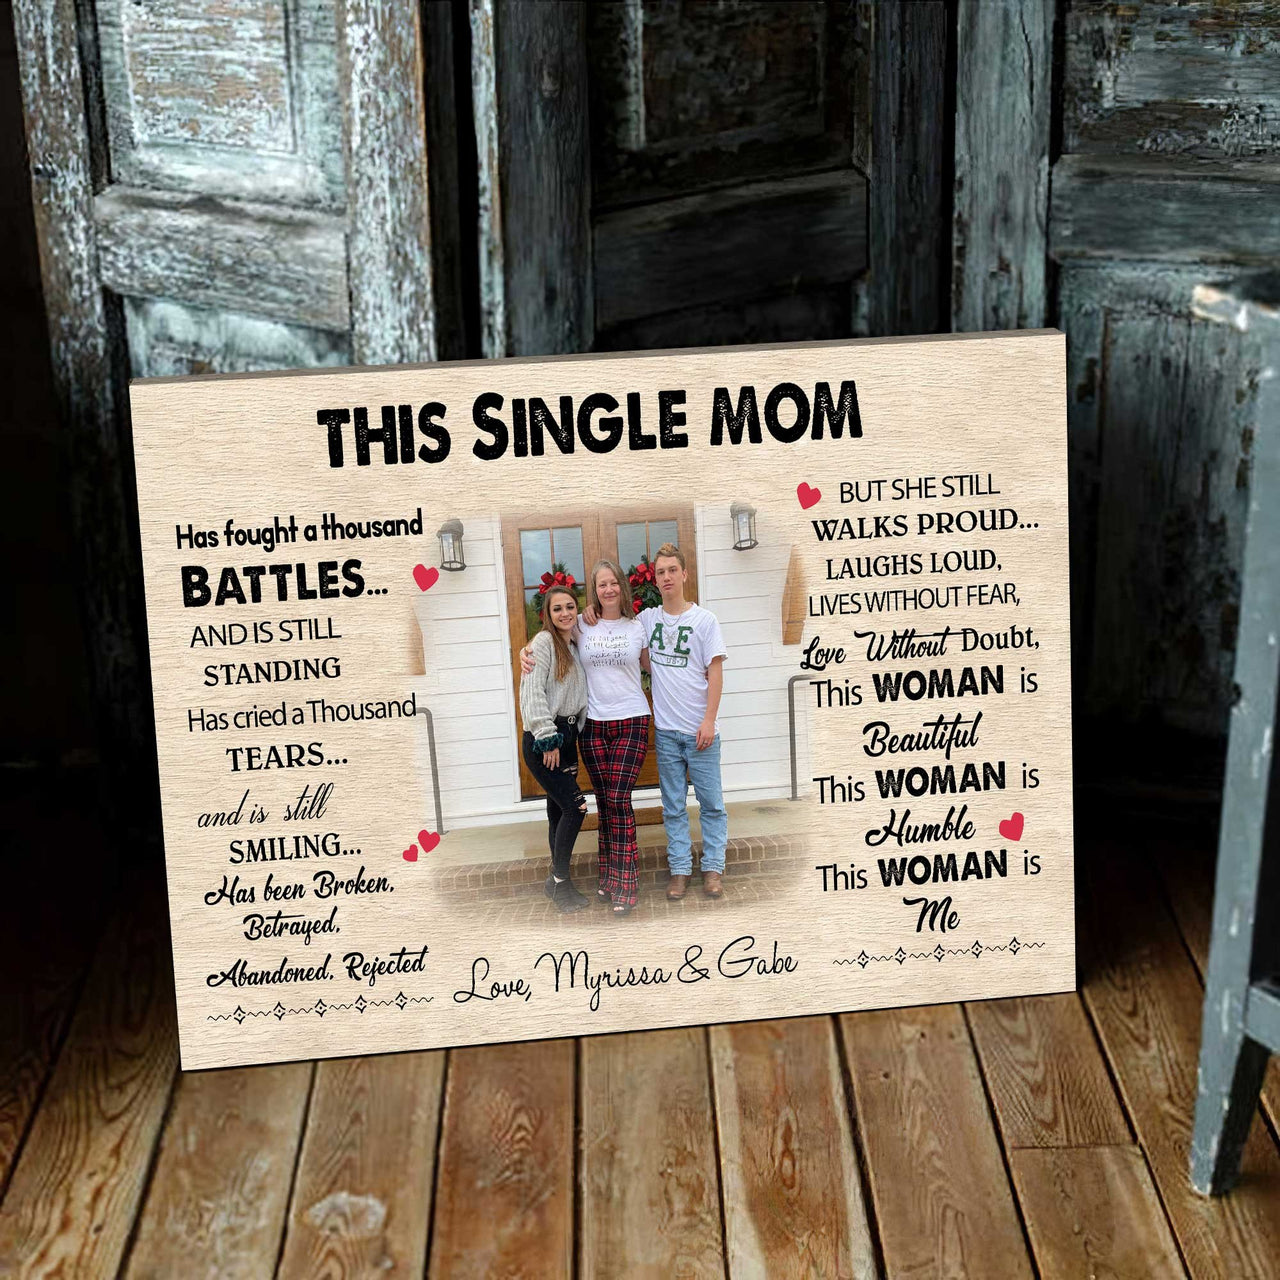 Customized Photo Single Mom and Daughter, Single Mother Canvas, Always be your little Girl Wall Art